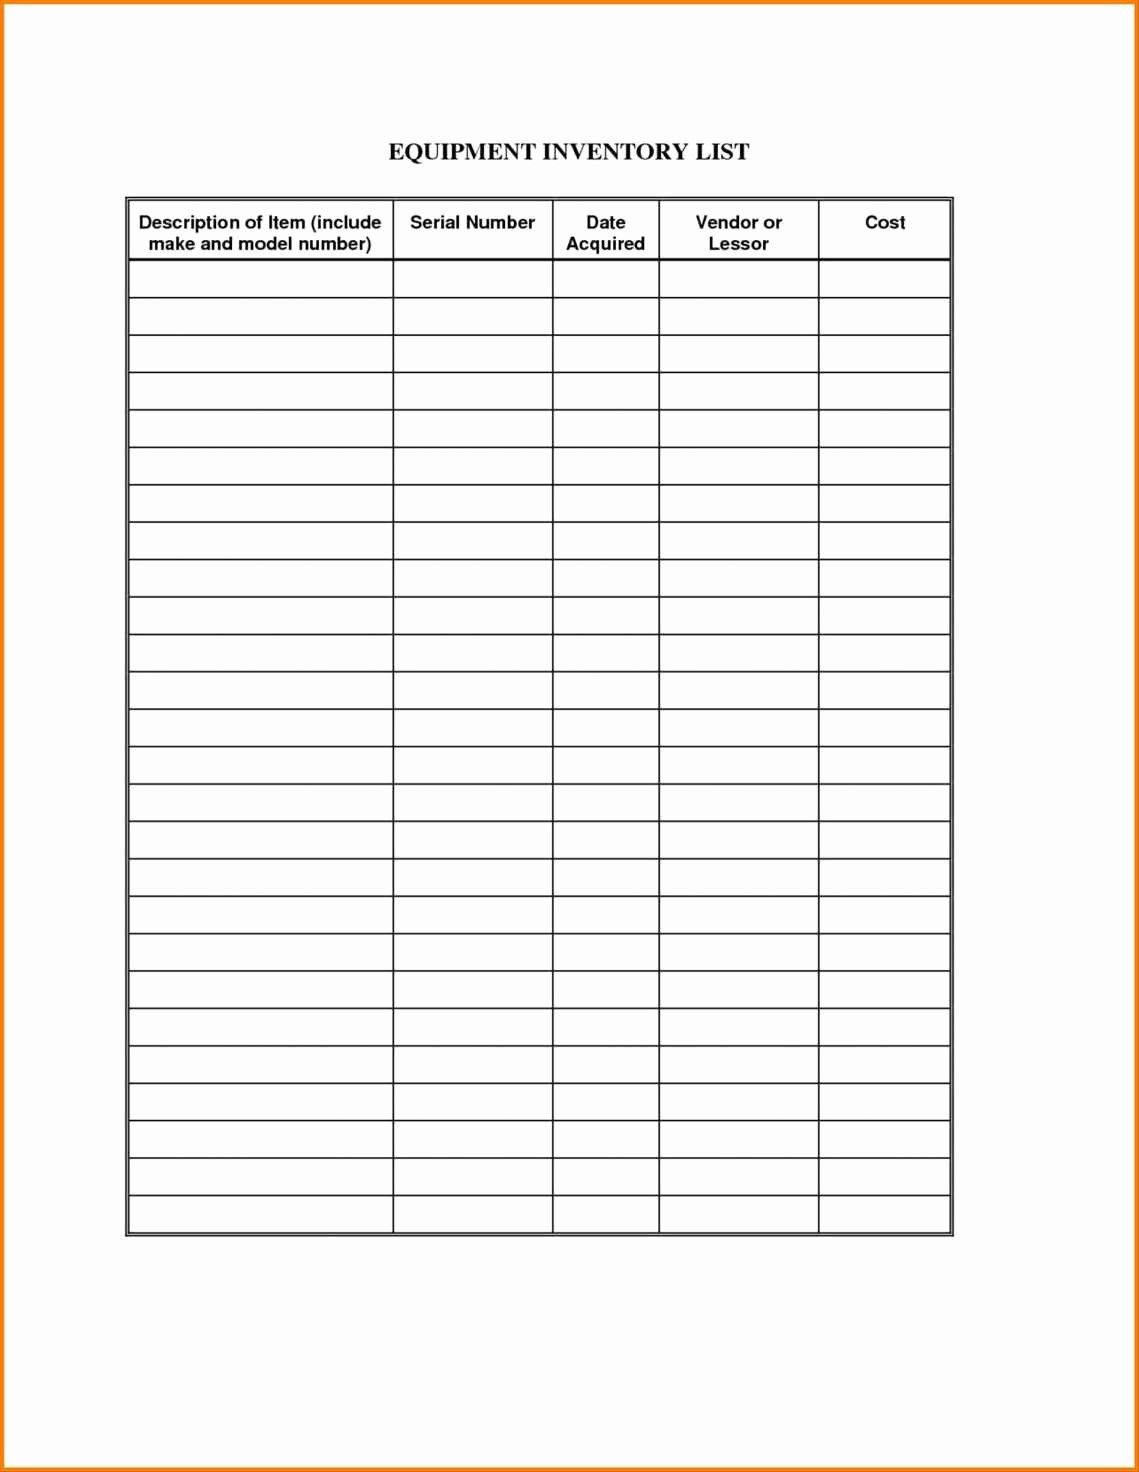 Inventory Log Sheet Excel Template Luxury Pest Control Log Sheet Template as Well as Bakery